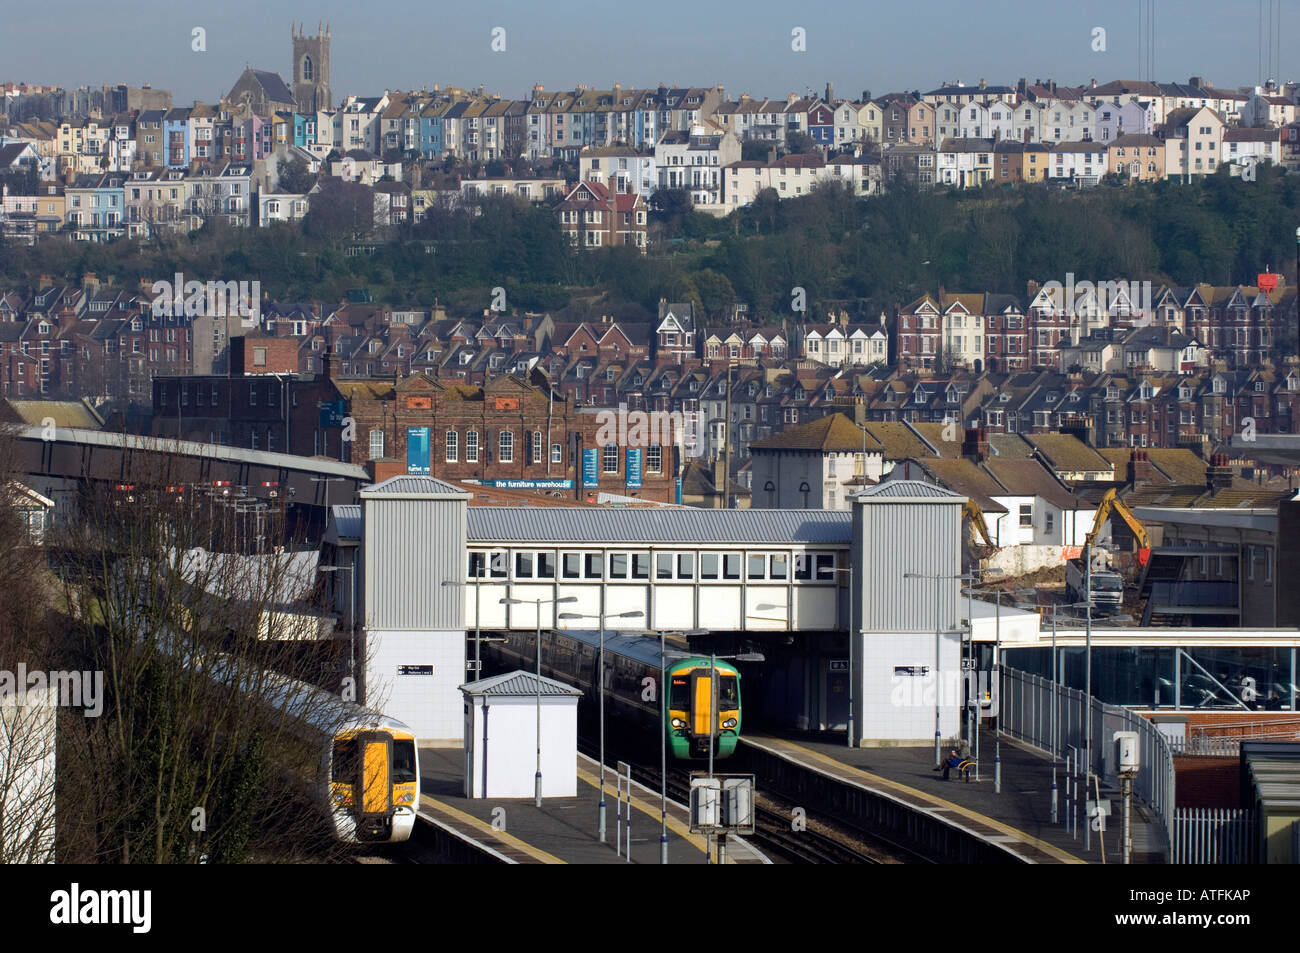 Hastings town railway station in Sussex with a view over Hastings and St Leonards in the background Stock Photo